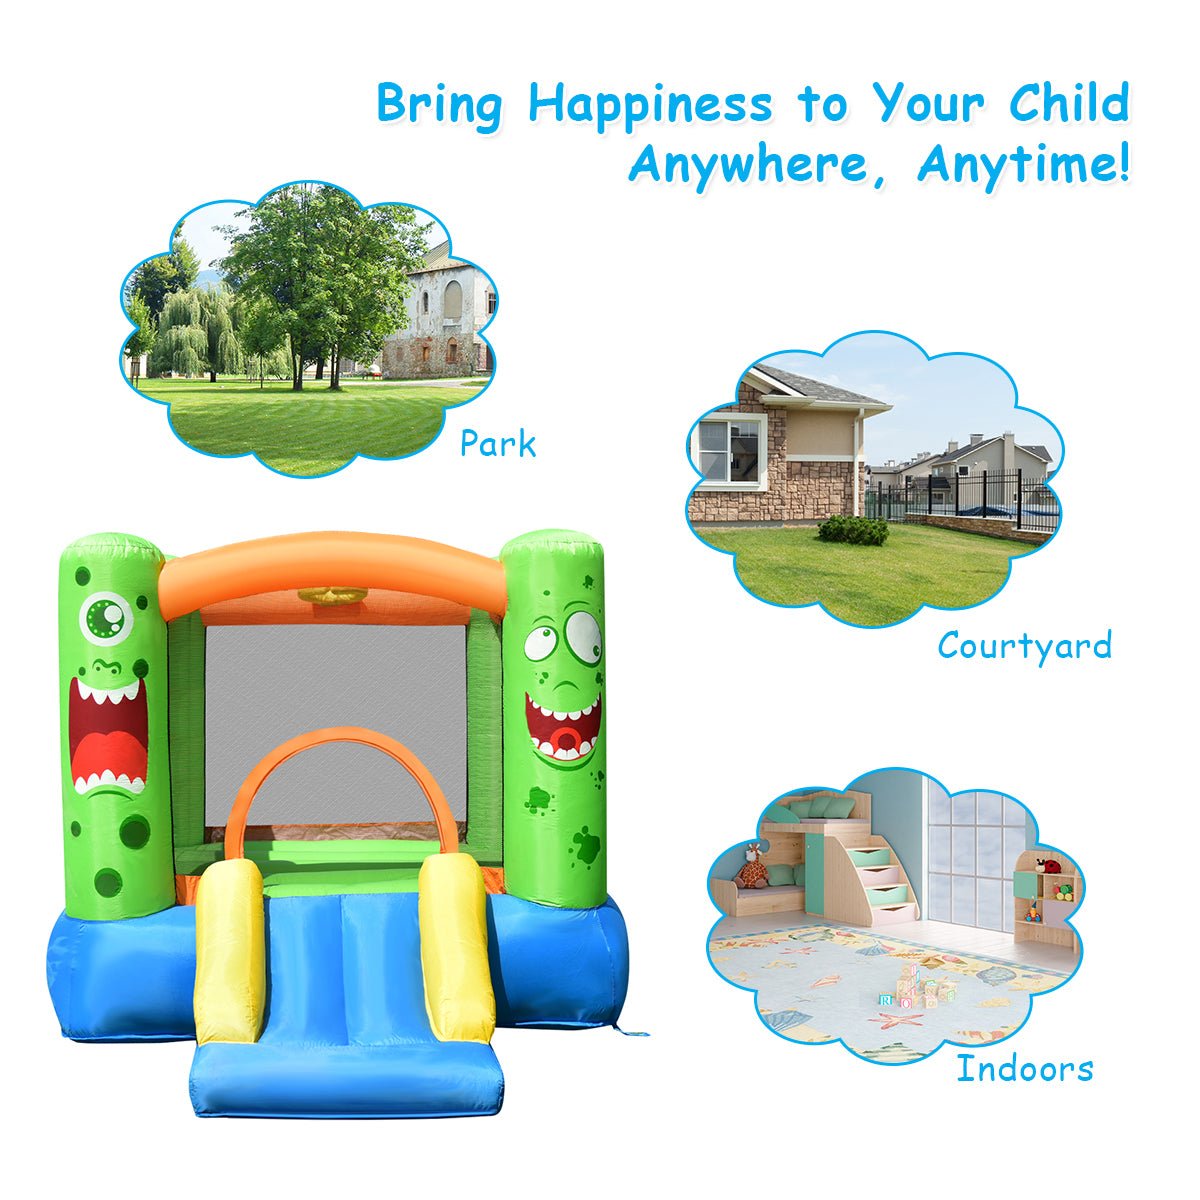 Children's Inflatable Bounce House - Slide, Basketball Rim, and Playtime